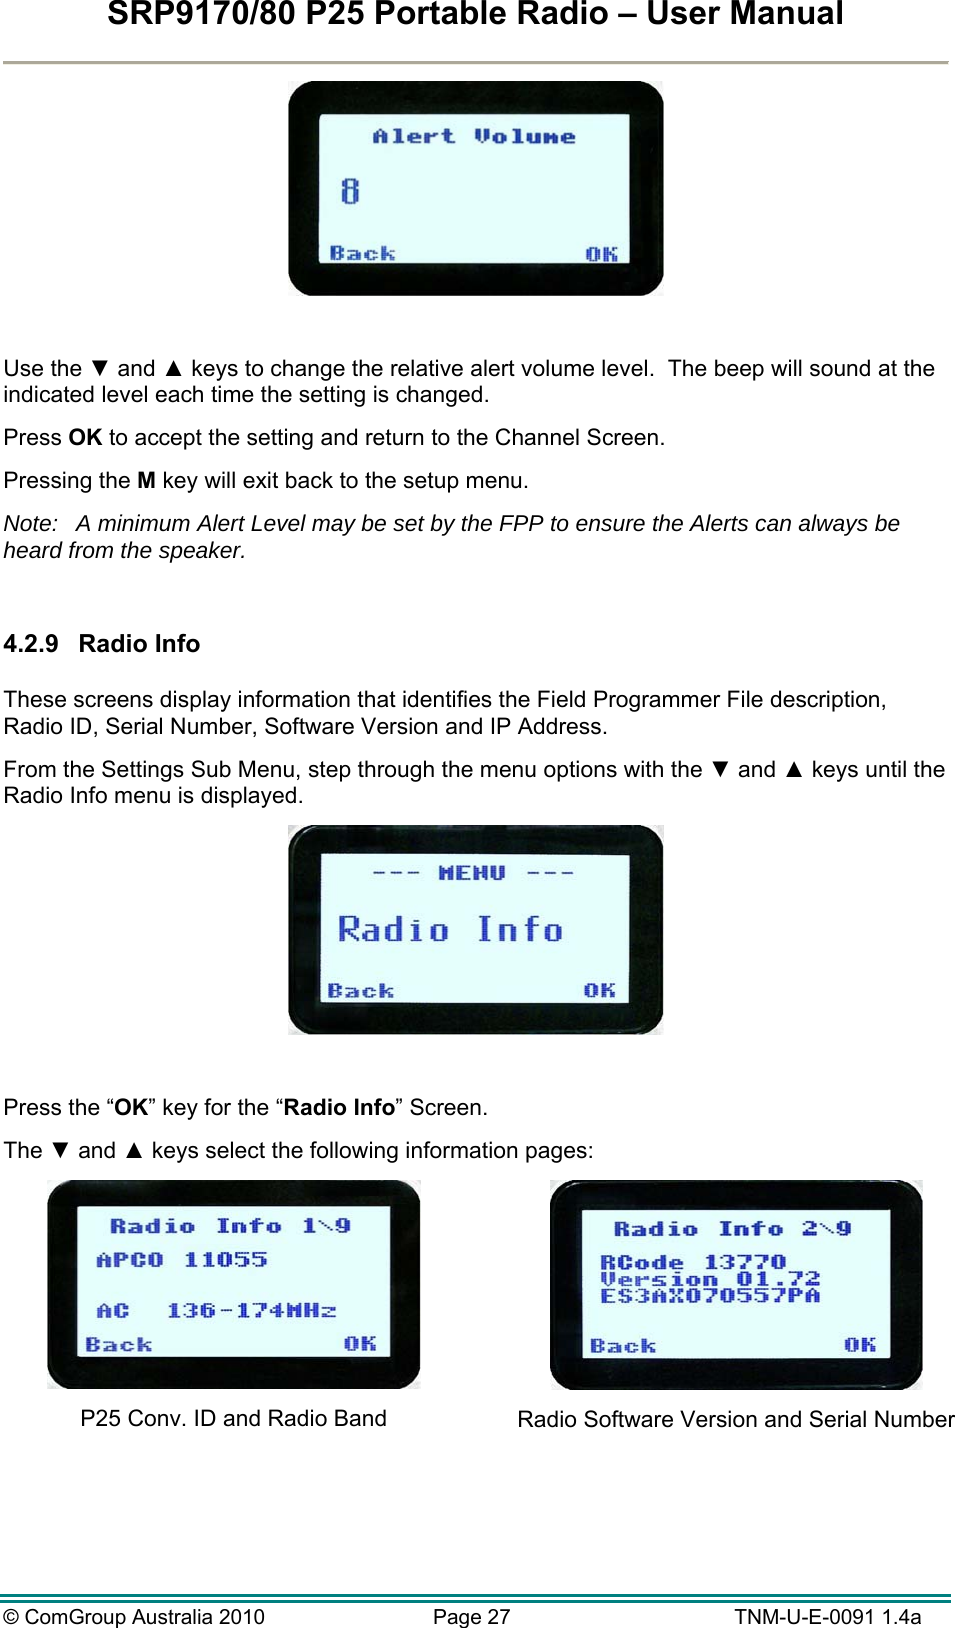 SRP9170/80 P25 Portable Radio – User Manual  © ComGroup Australia 2010  Page 27   TNM-U-E-0091 1.4a   Use the ▼ and ▲ keys to change the relative alert volume level.  The beep will sound at the indicated level each time the setting is changed. Press OK to accept the setting and return to the Channel Screen. Pressing the M key will exit back to the setup menu. Note:  A minimum Alert Level may be set by the FPP to ensure the Alerts can always be heard from the speaker.  4.2.9 Radio Info  These screens display information that identifies the Field Programmer File description, Radio ID, Serial Number, Software Version and IP Address. From the Settings Sub Menu, step through the menu options with the ▼ and ▲ keys until the Radio Info menu is displayed.   Press the “OK” key for the “Radio Info” Screen. The ▼ and ▲ keys select the following information pages:  P25 Conv. ID and Radio Band   Radio Software Version and Serial Number 